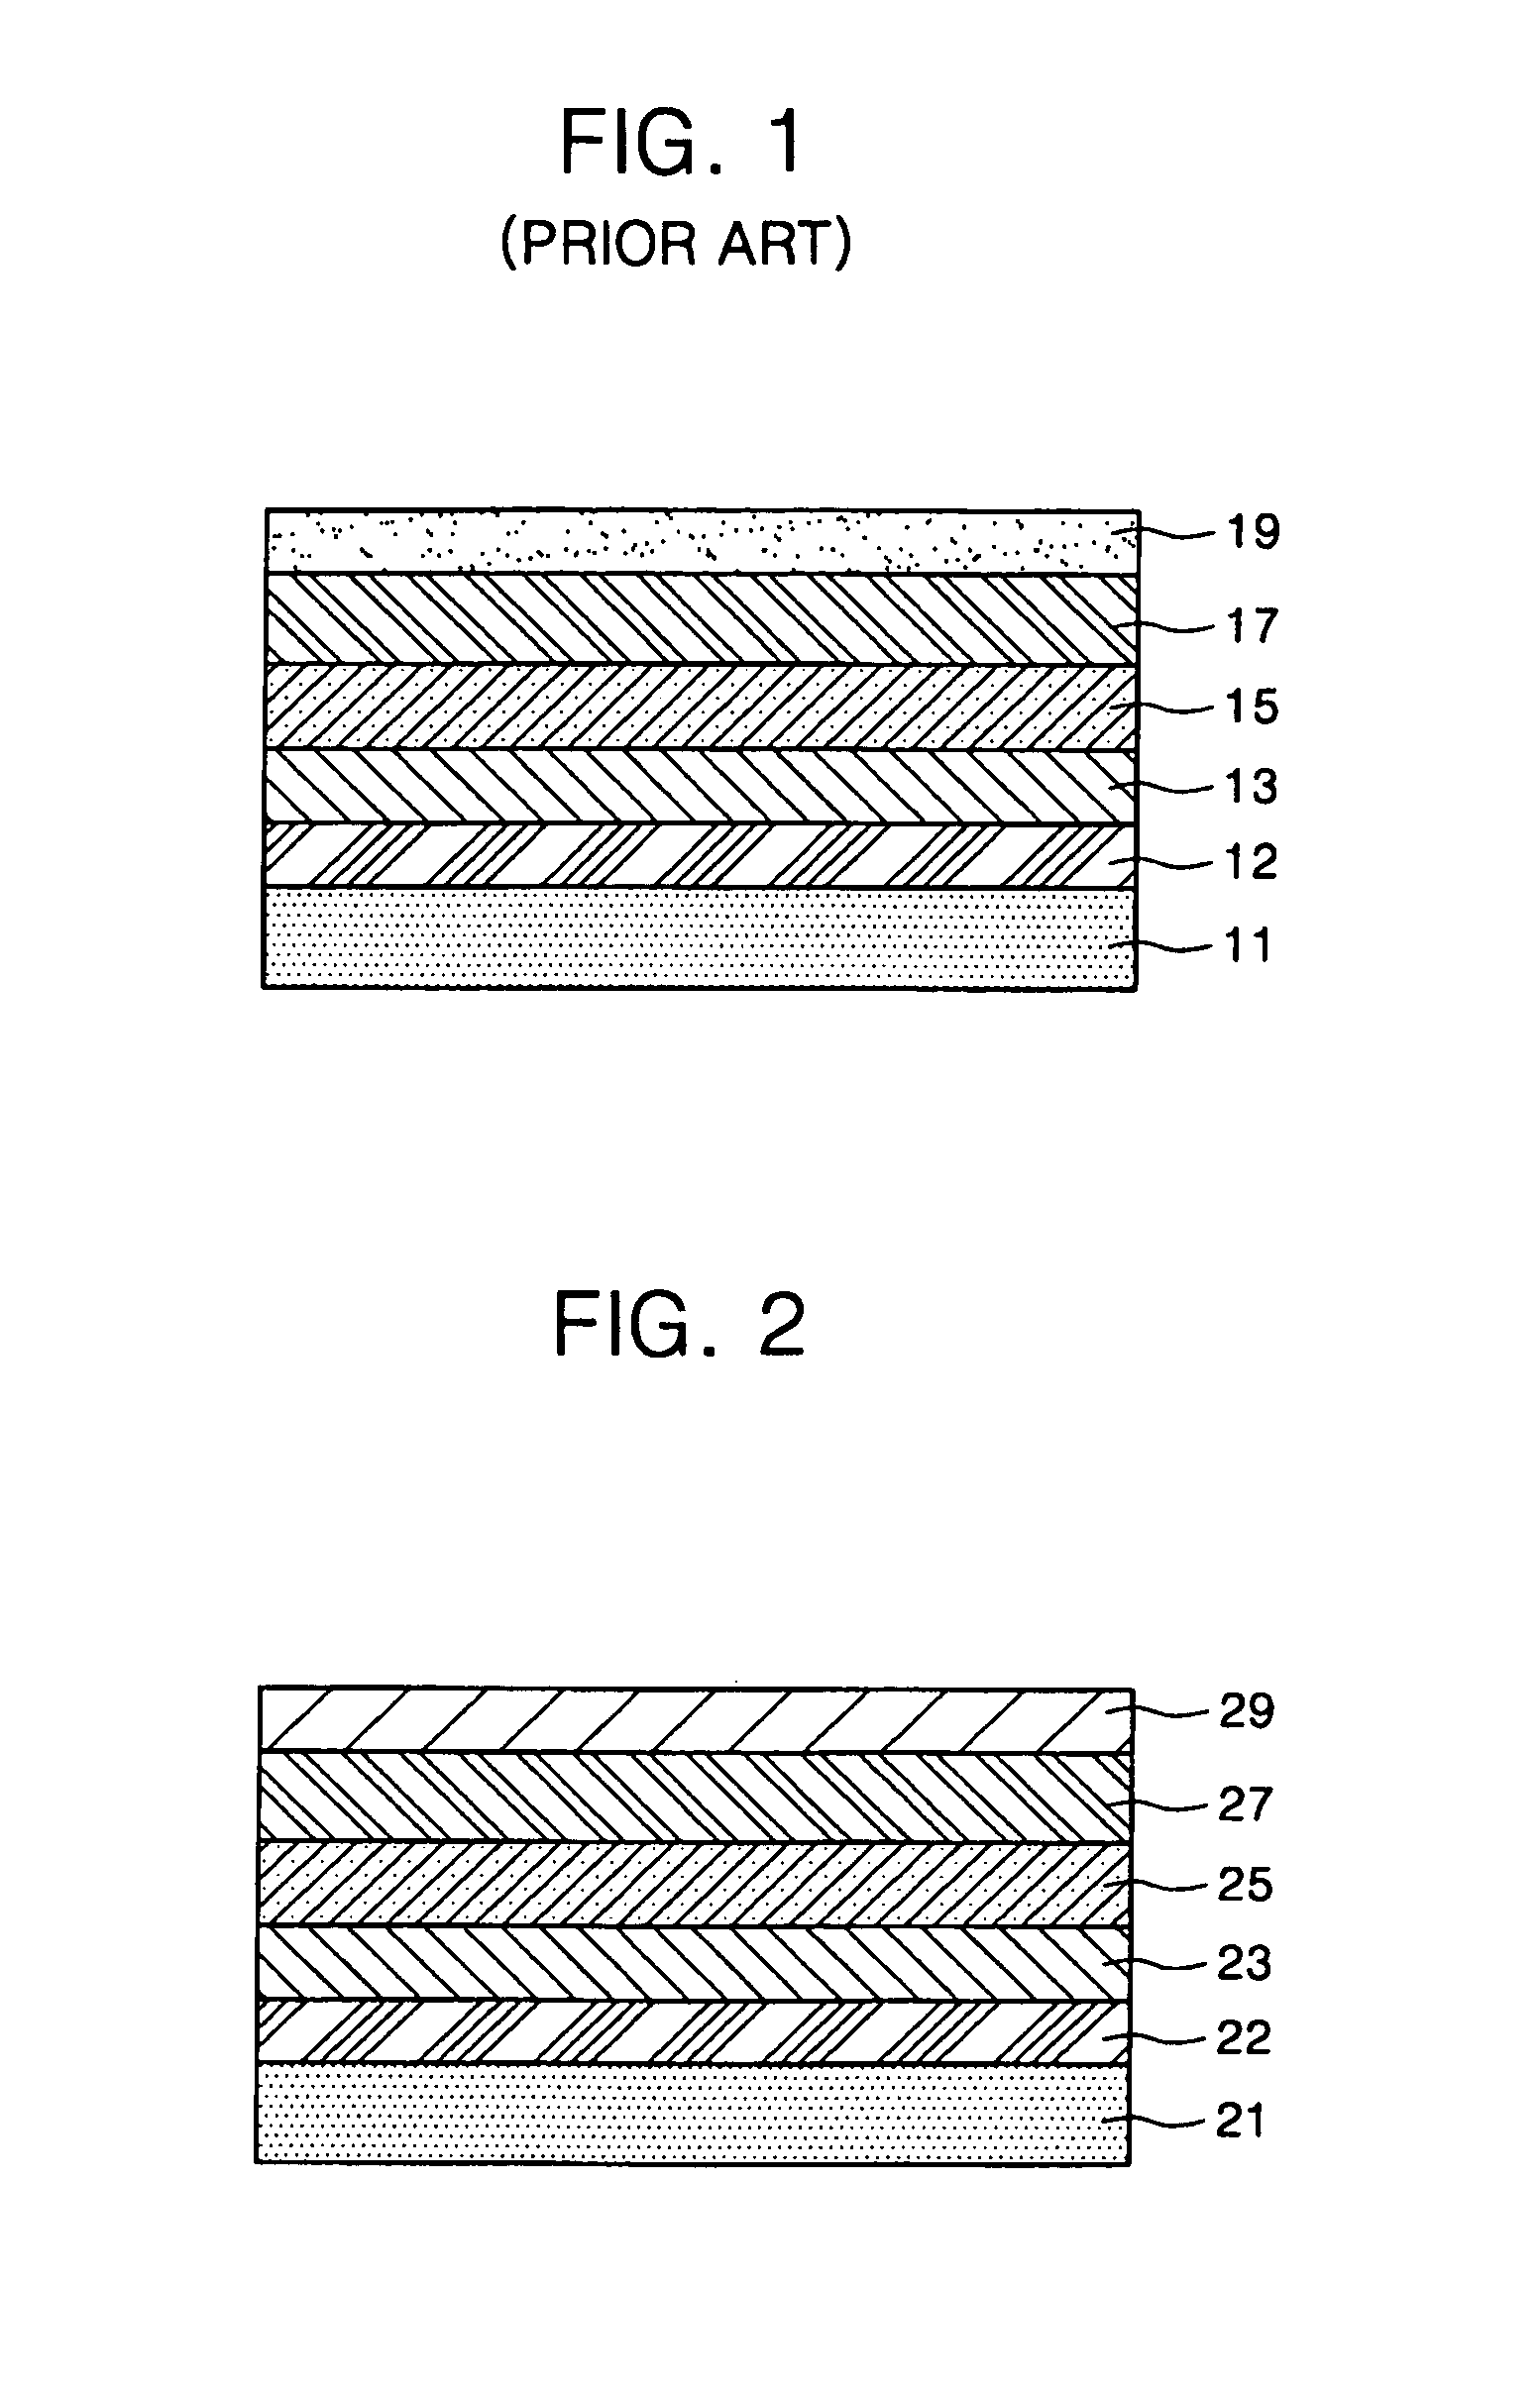 Organic light emitting display with organic capping layer having a specific refractive index